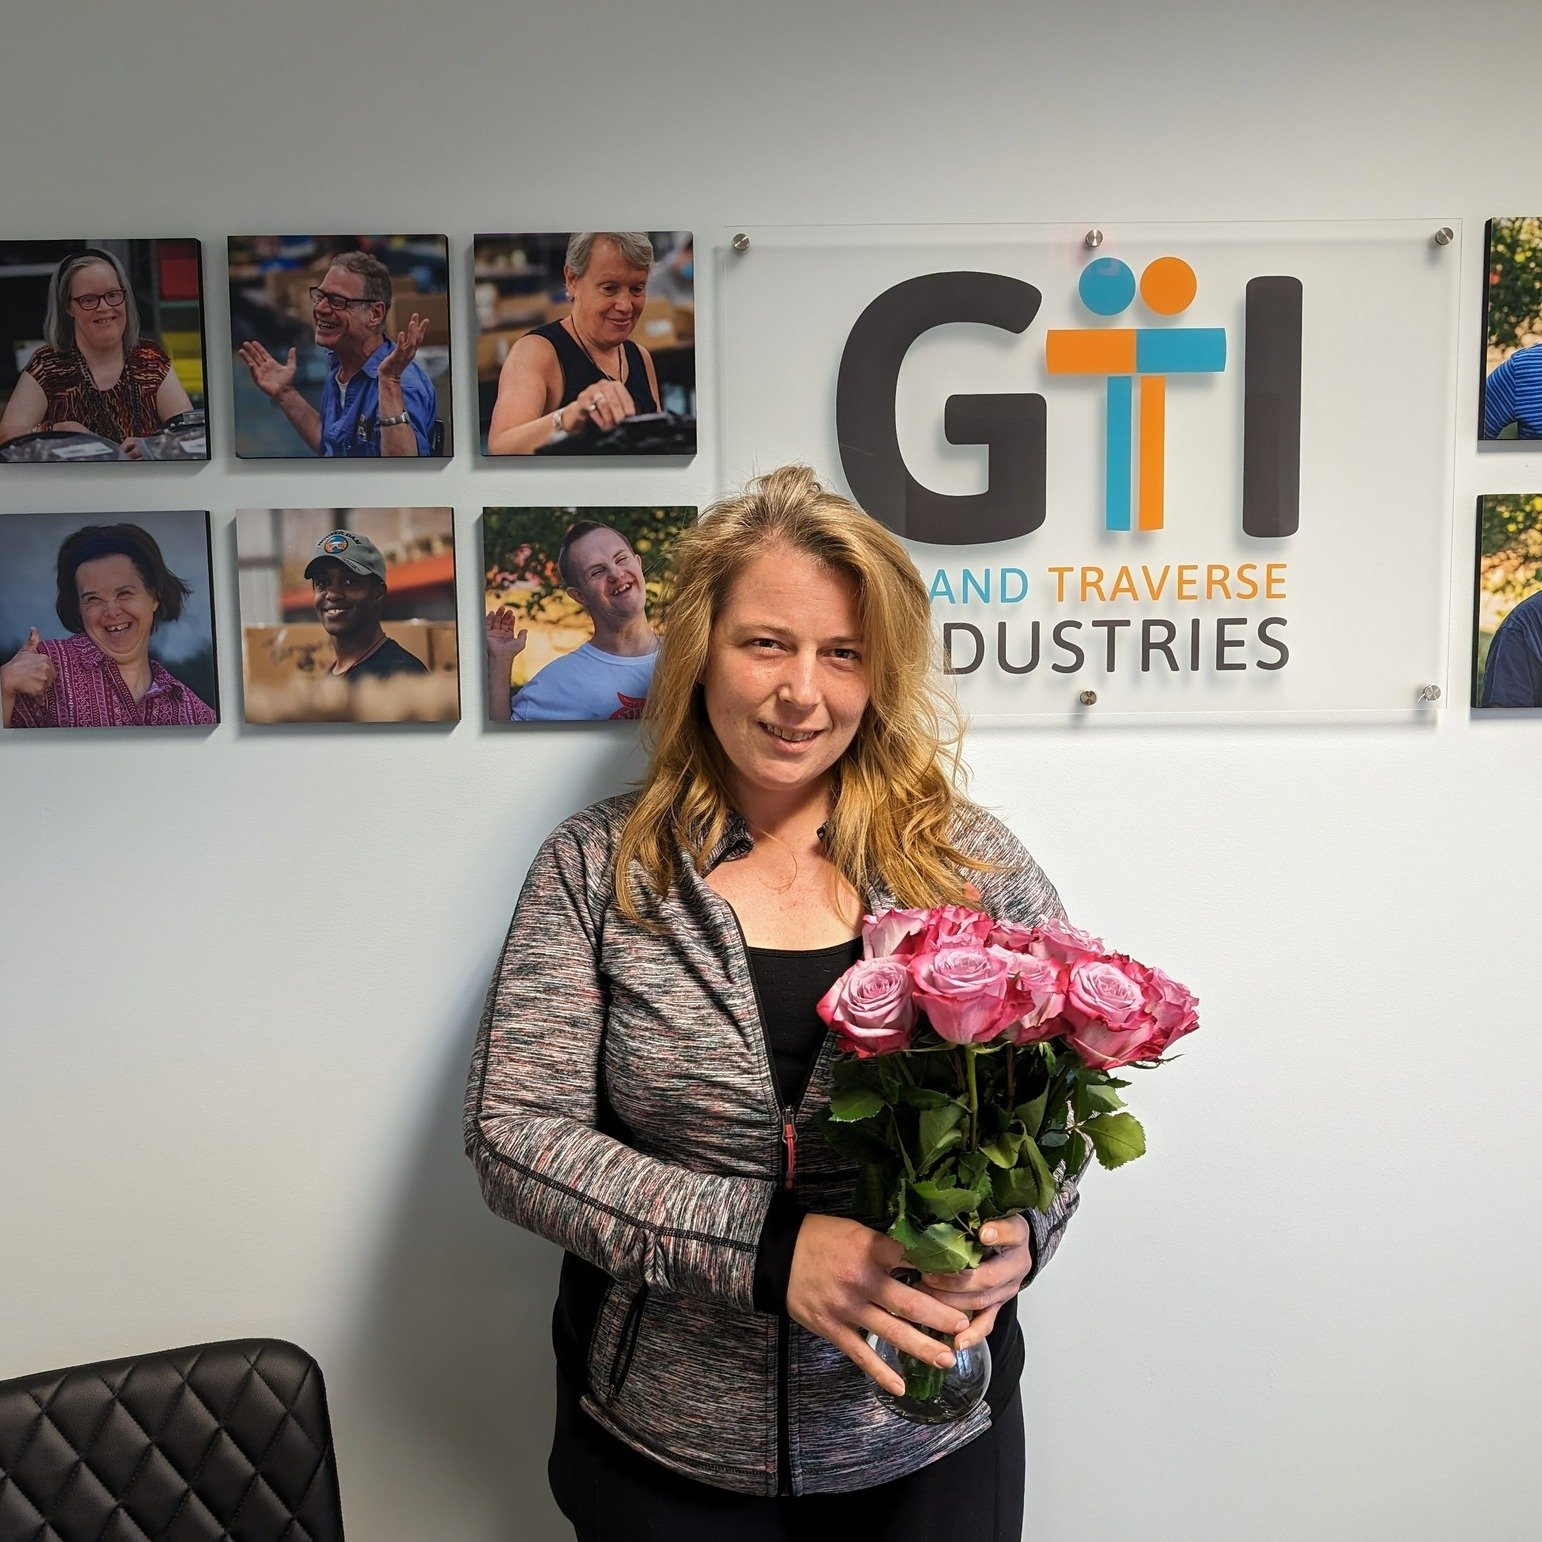 Happy Administrative Professionals Day to Nicole and Codie! GTI would not be able to function without the hard work and expertise of these two ladies. If you call or stop by our Traverse City office today, please give them a hearty &quot;Thank you!&q